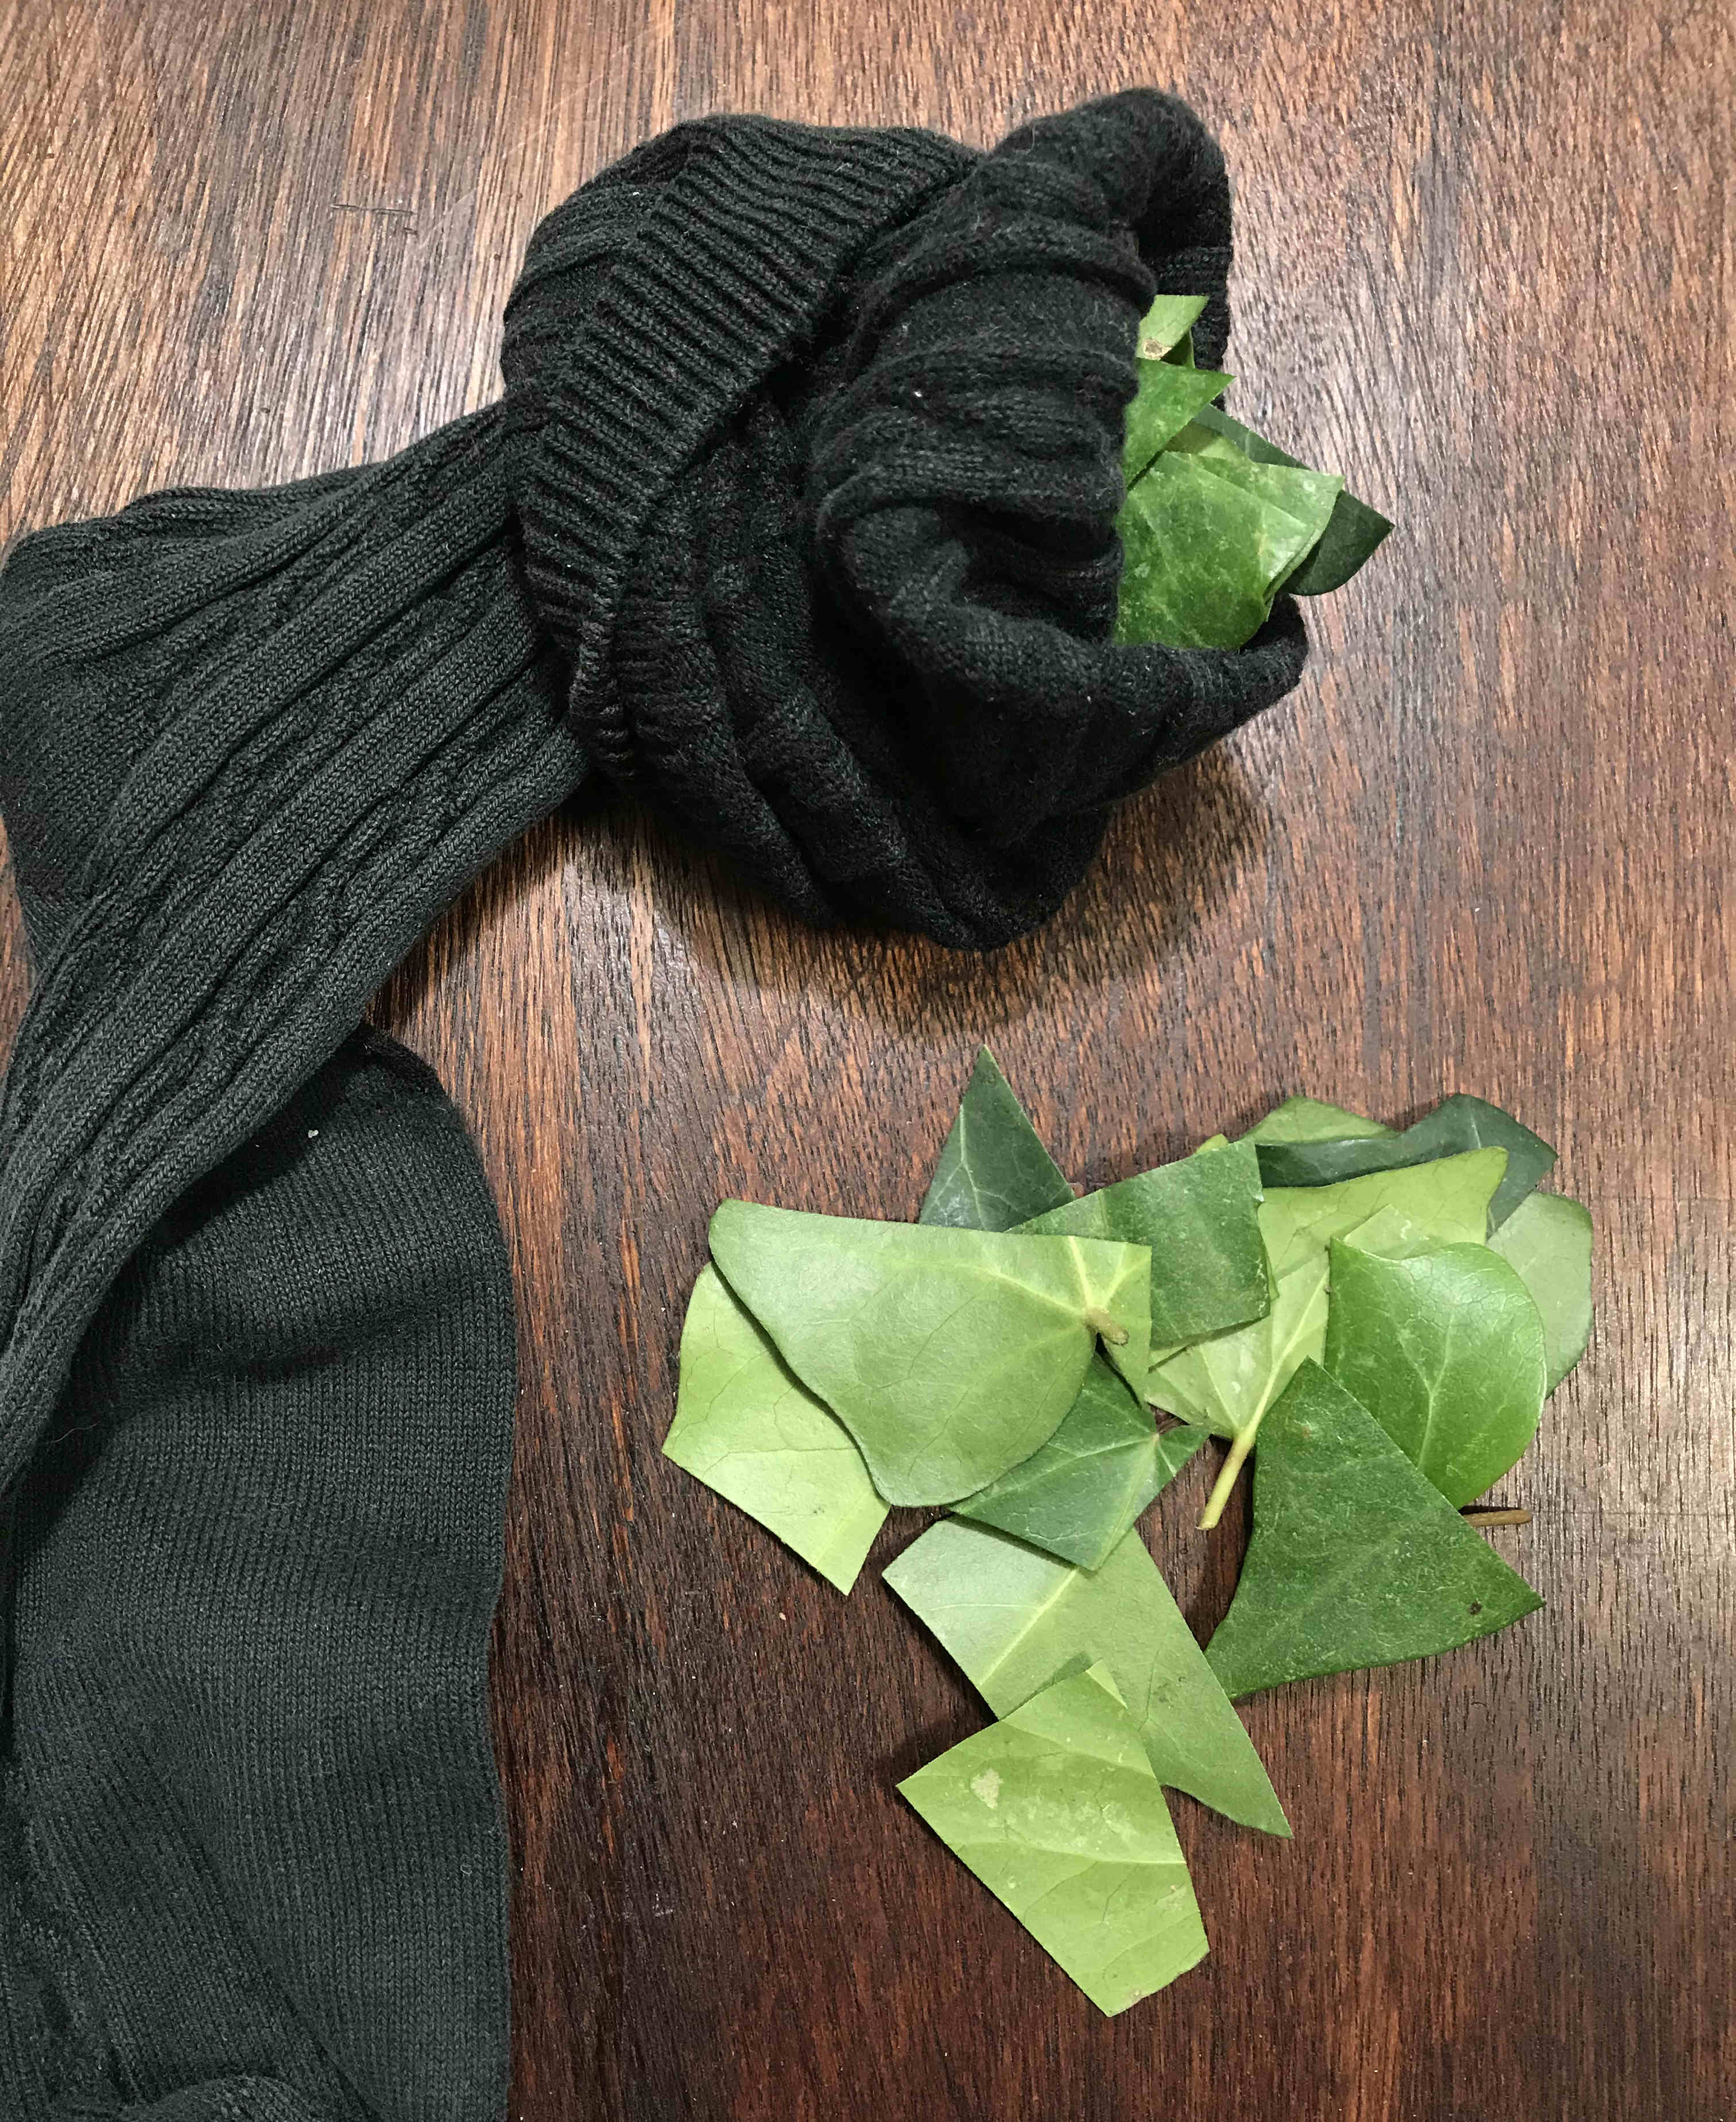 a sock filled with cut up ivy leaves to wash clothes